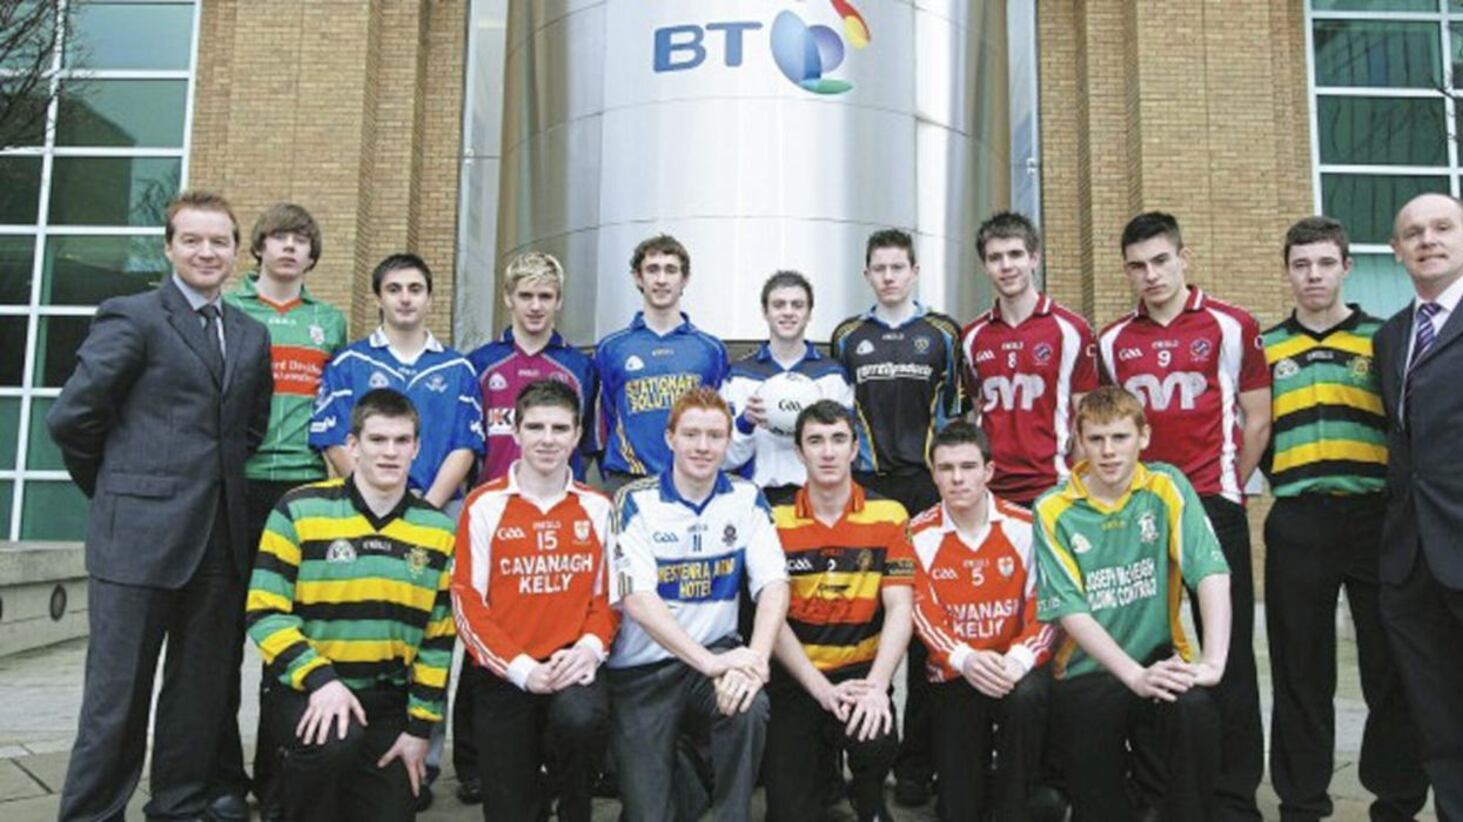 THEY&rsquo;RE ALL STARS: Pictured at the BT Ulster Colleges Football Allstars announcement at BT Tower in Belfast yesterday are, (back row, l-r): Ulster Colleges Council chairman Seamus Meehan, Andrew Murnin, Ross McGarry, Caolan Trainor, Barry Reilly, Daniel McKinless, John Carron, Conan Grugan, Sean Warnock, Declan Lynch and BT consumer director Peter Morris. (Front row, l-r): Christopher McGuinness, Connor McAliskey, Daniel McKenna, Ethan Toner, Shea McGarrity and Paul Allen 